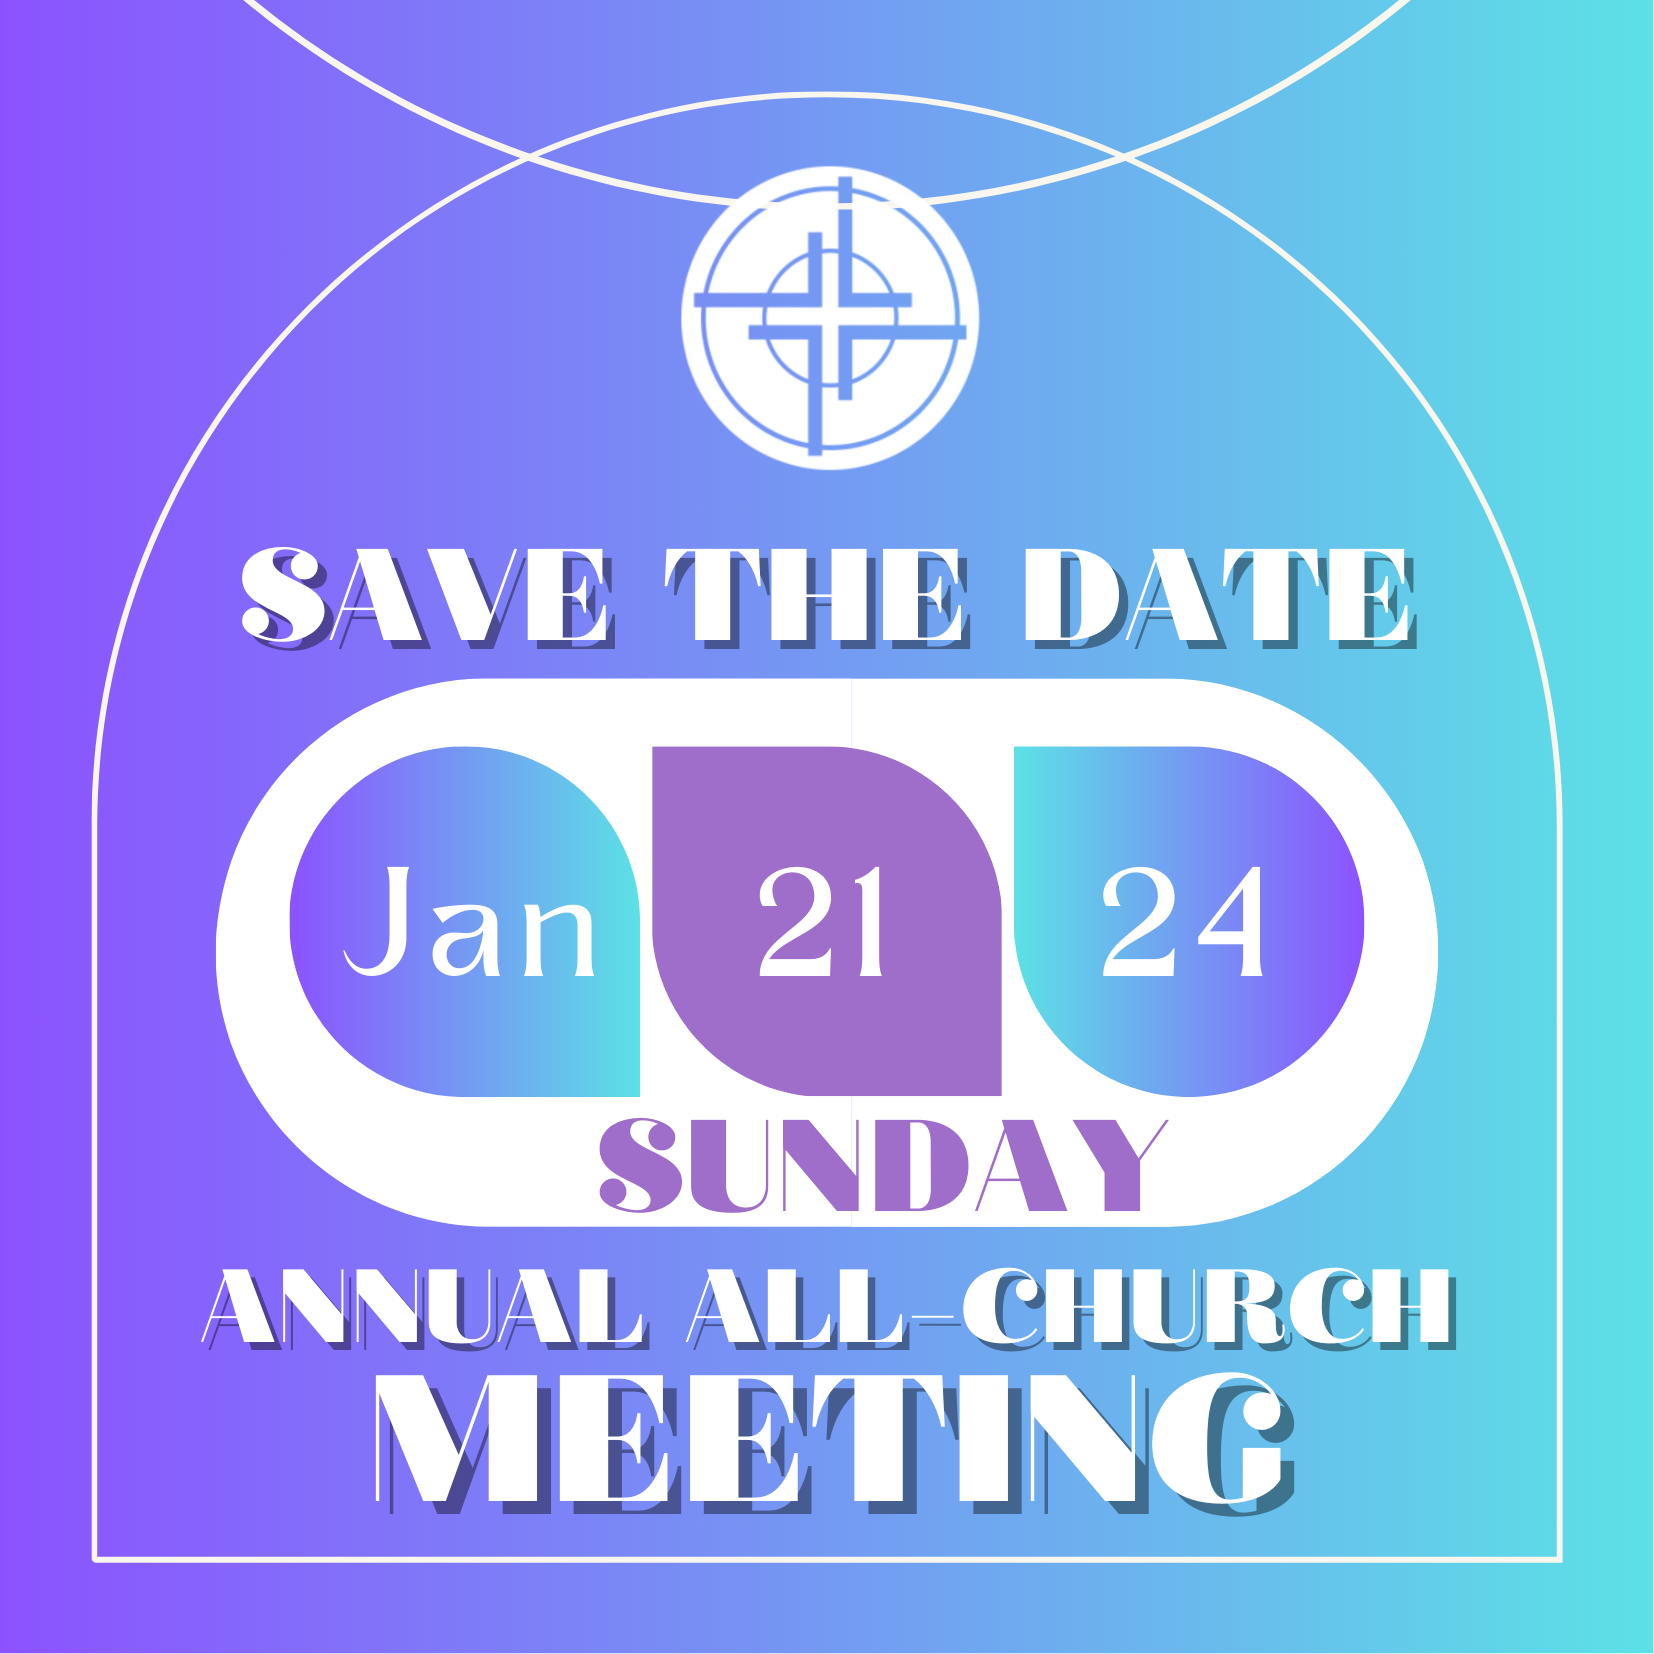 Save the date for the All-Church meeting on January 21, 2024 at 10:30 am in Hartman Hall